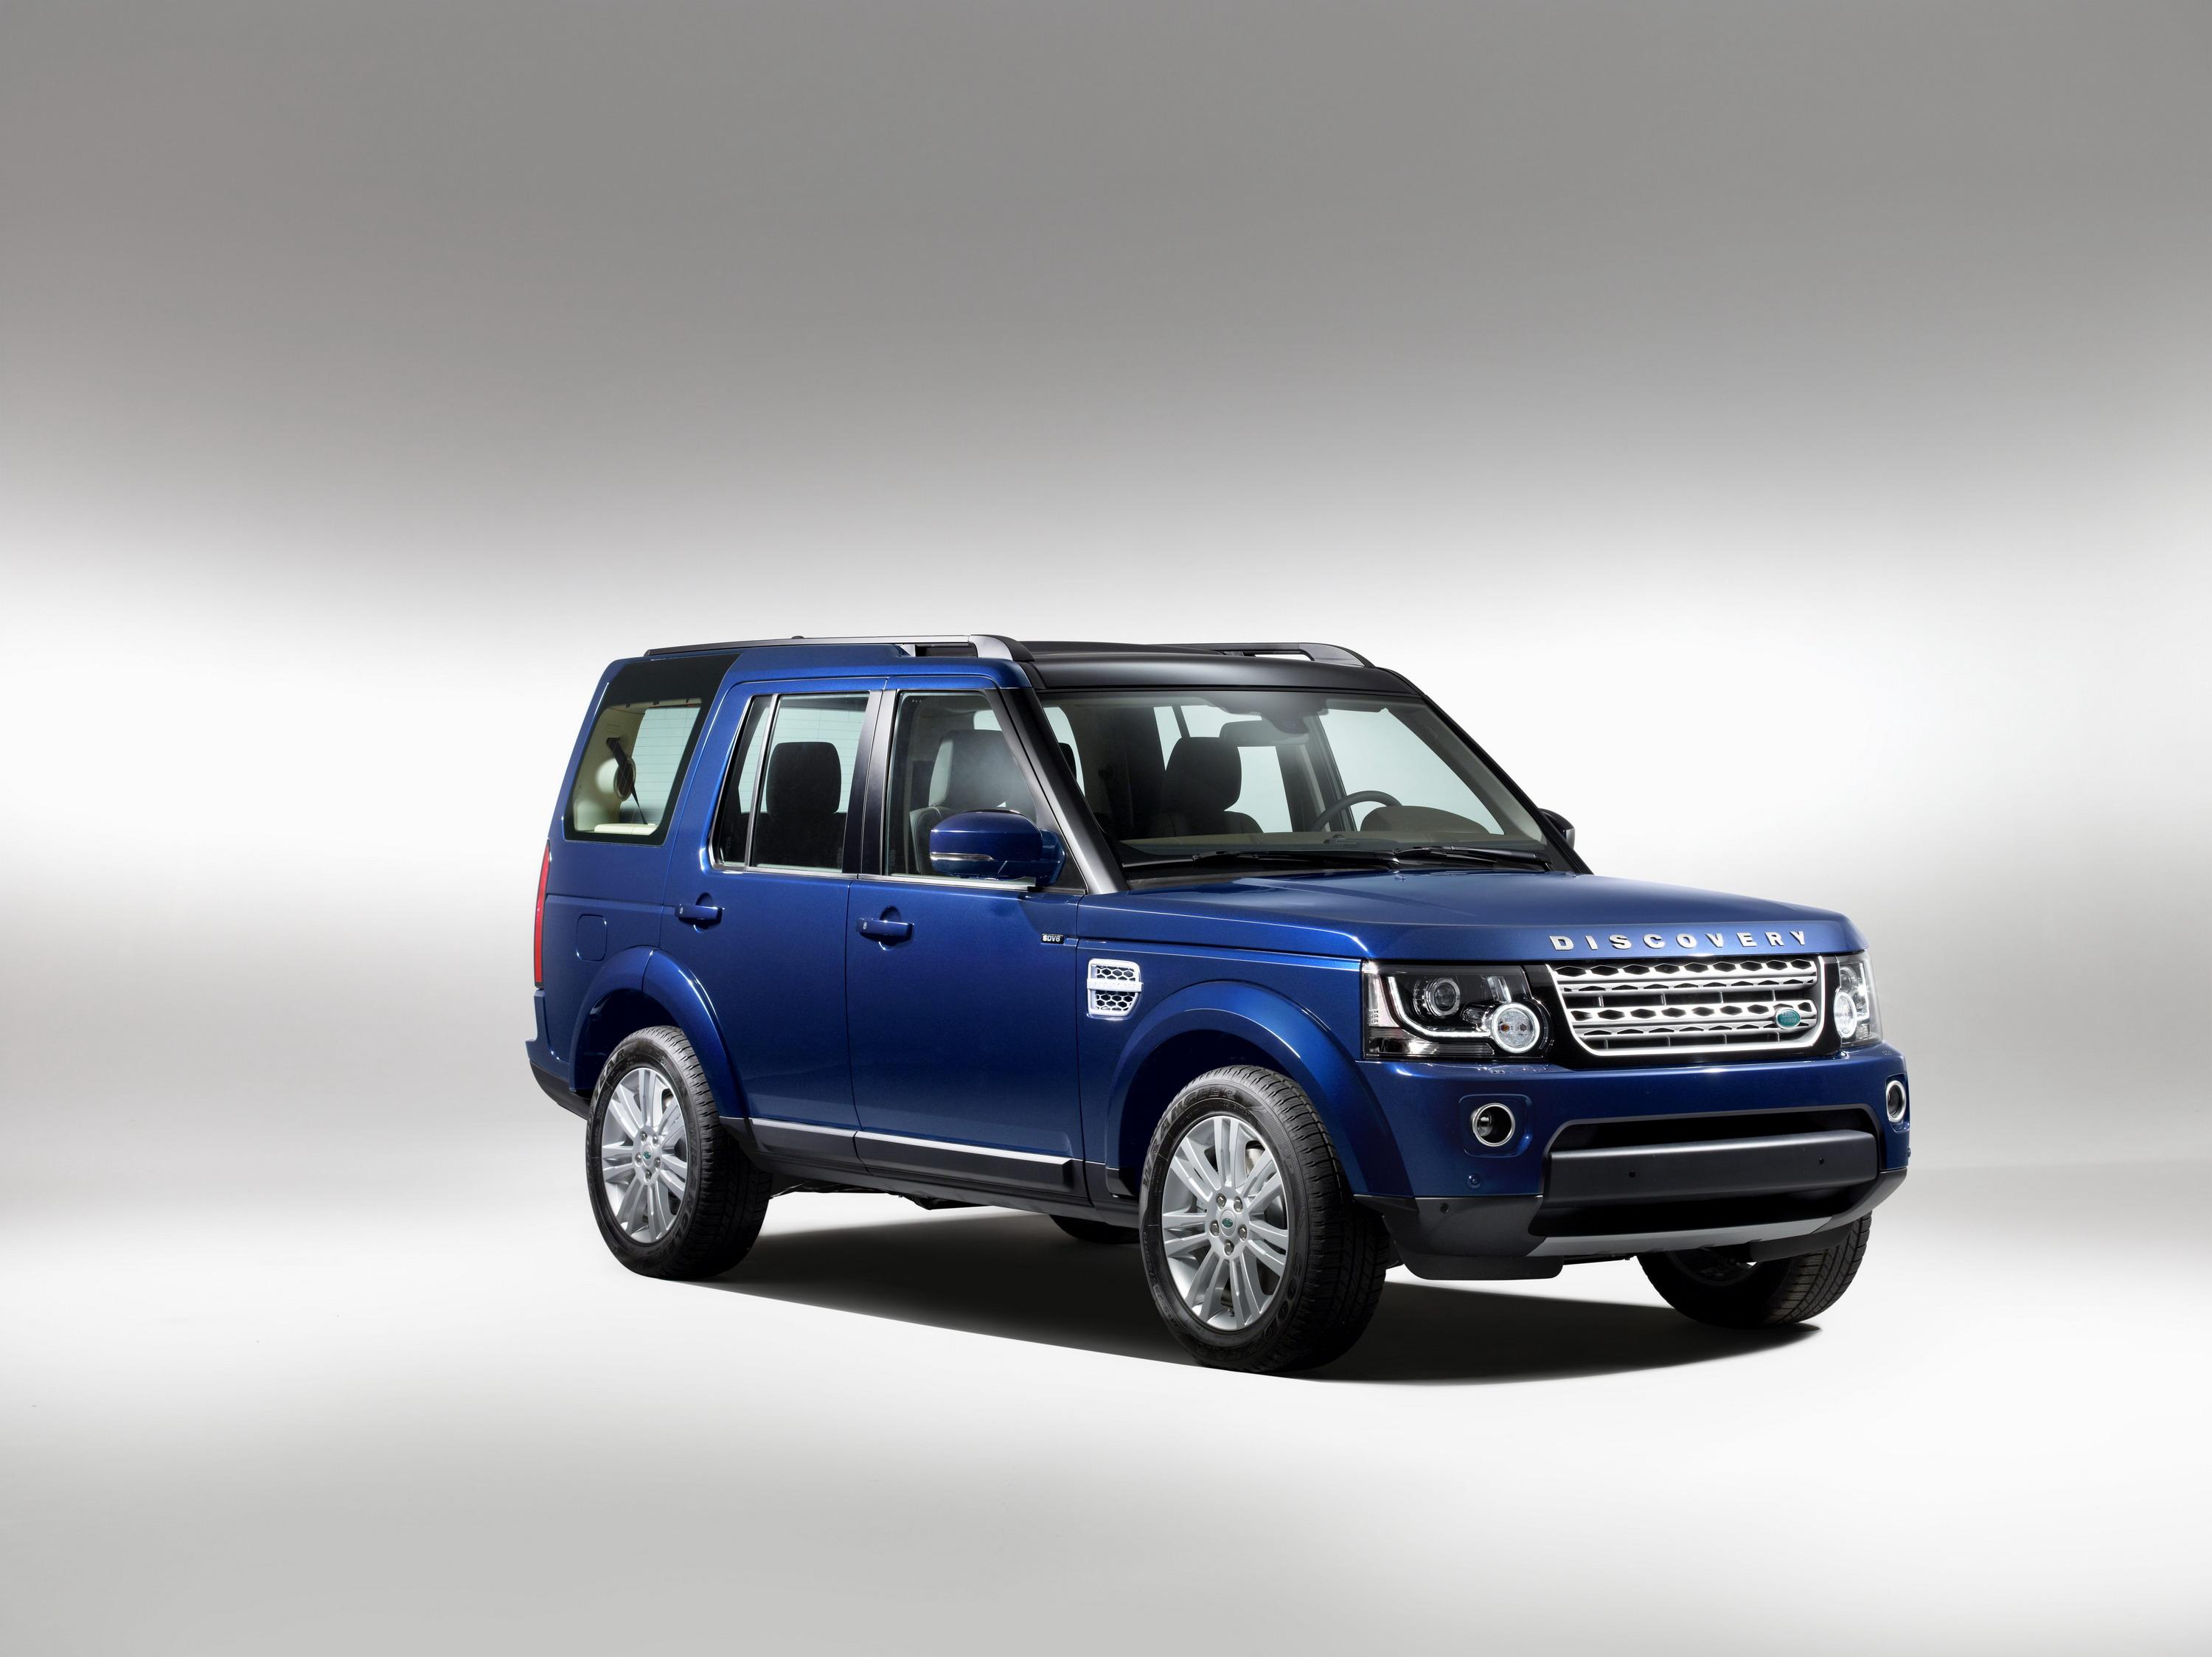 Land Rover Discovery Picture, Photo, Wallpaper